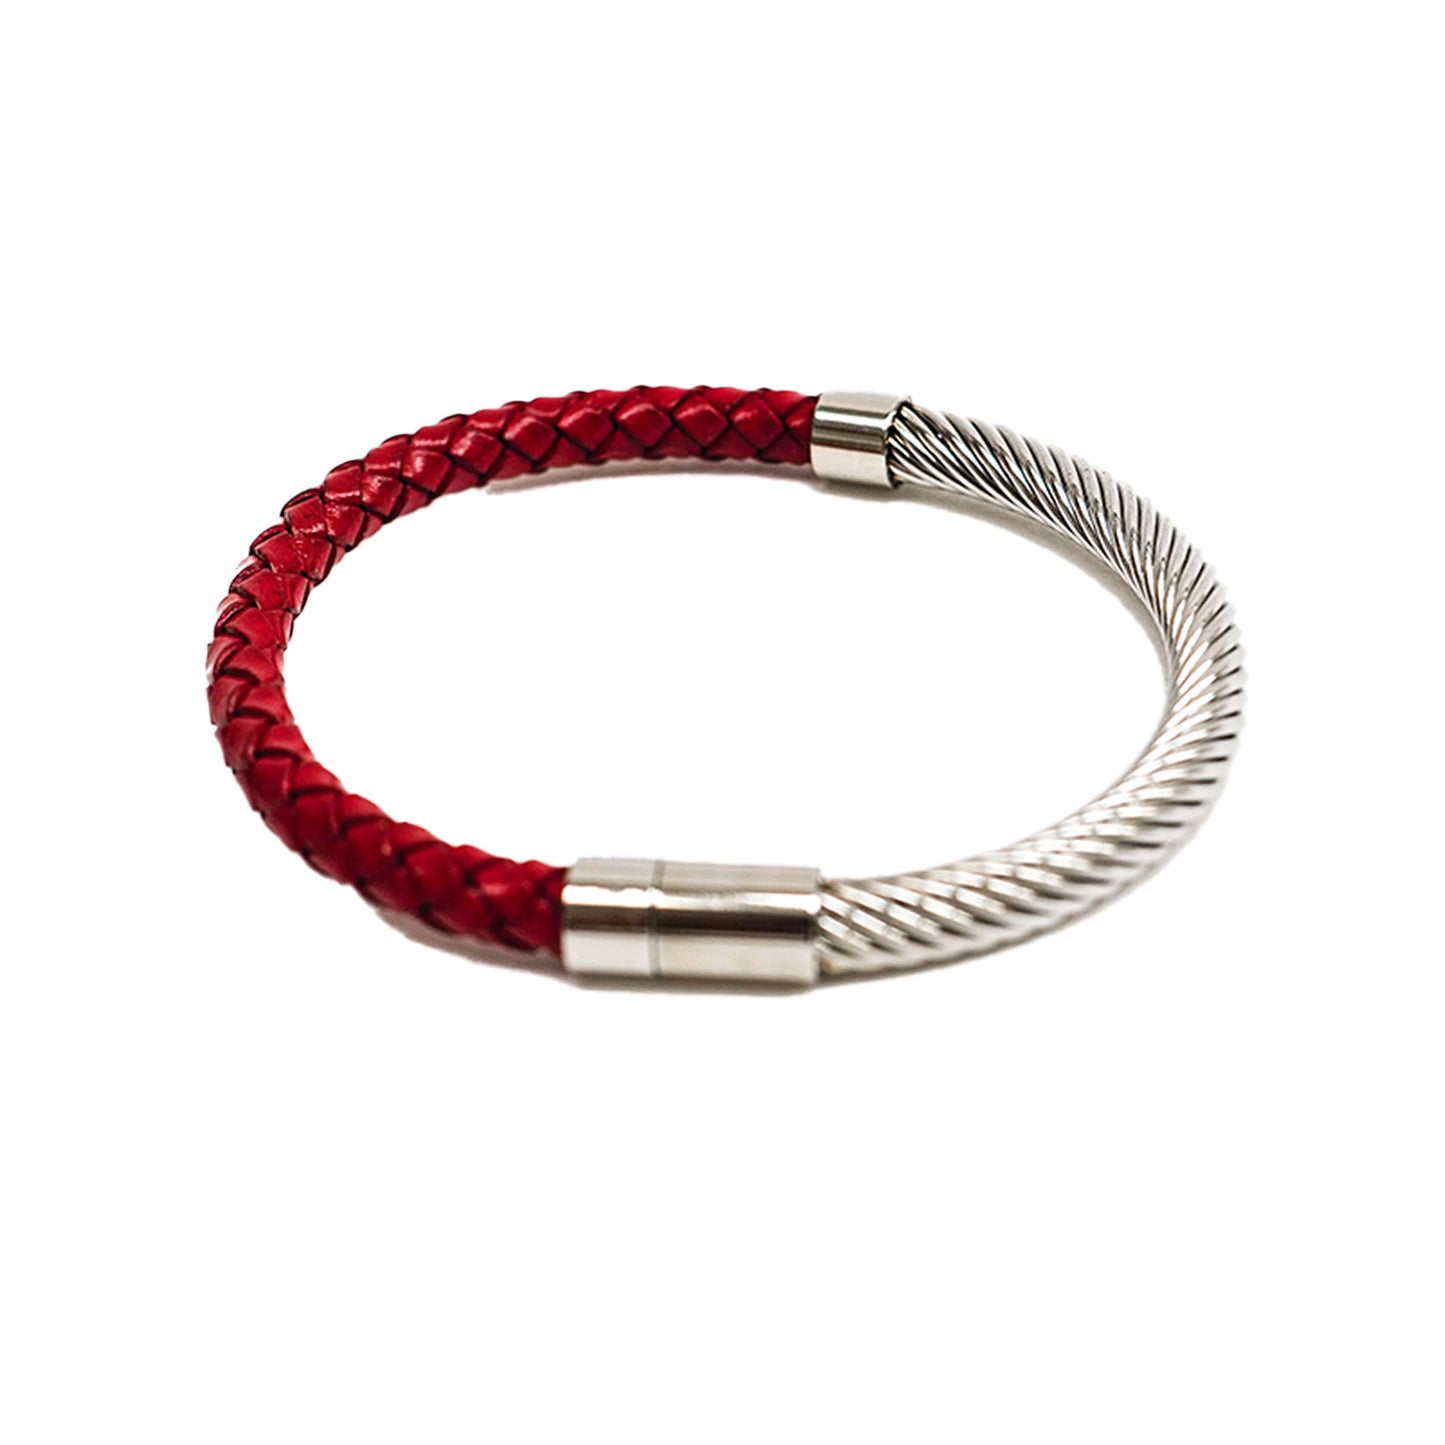 Stainless Steel Leather Braided Bracelet